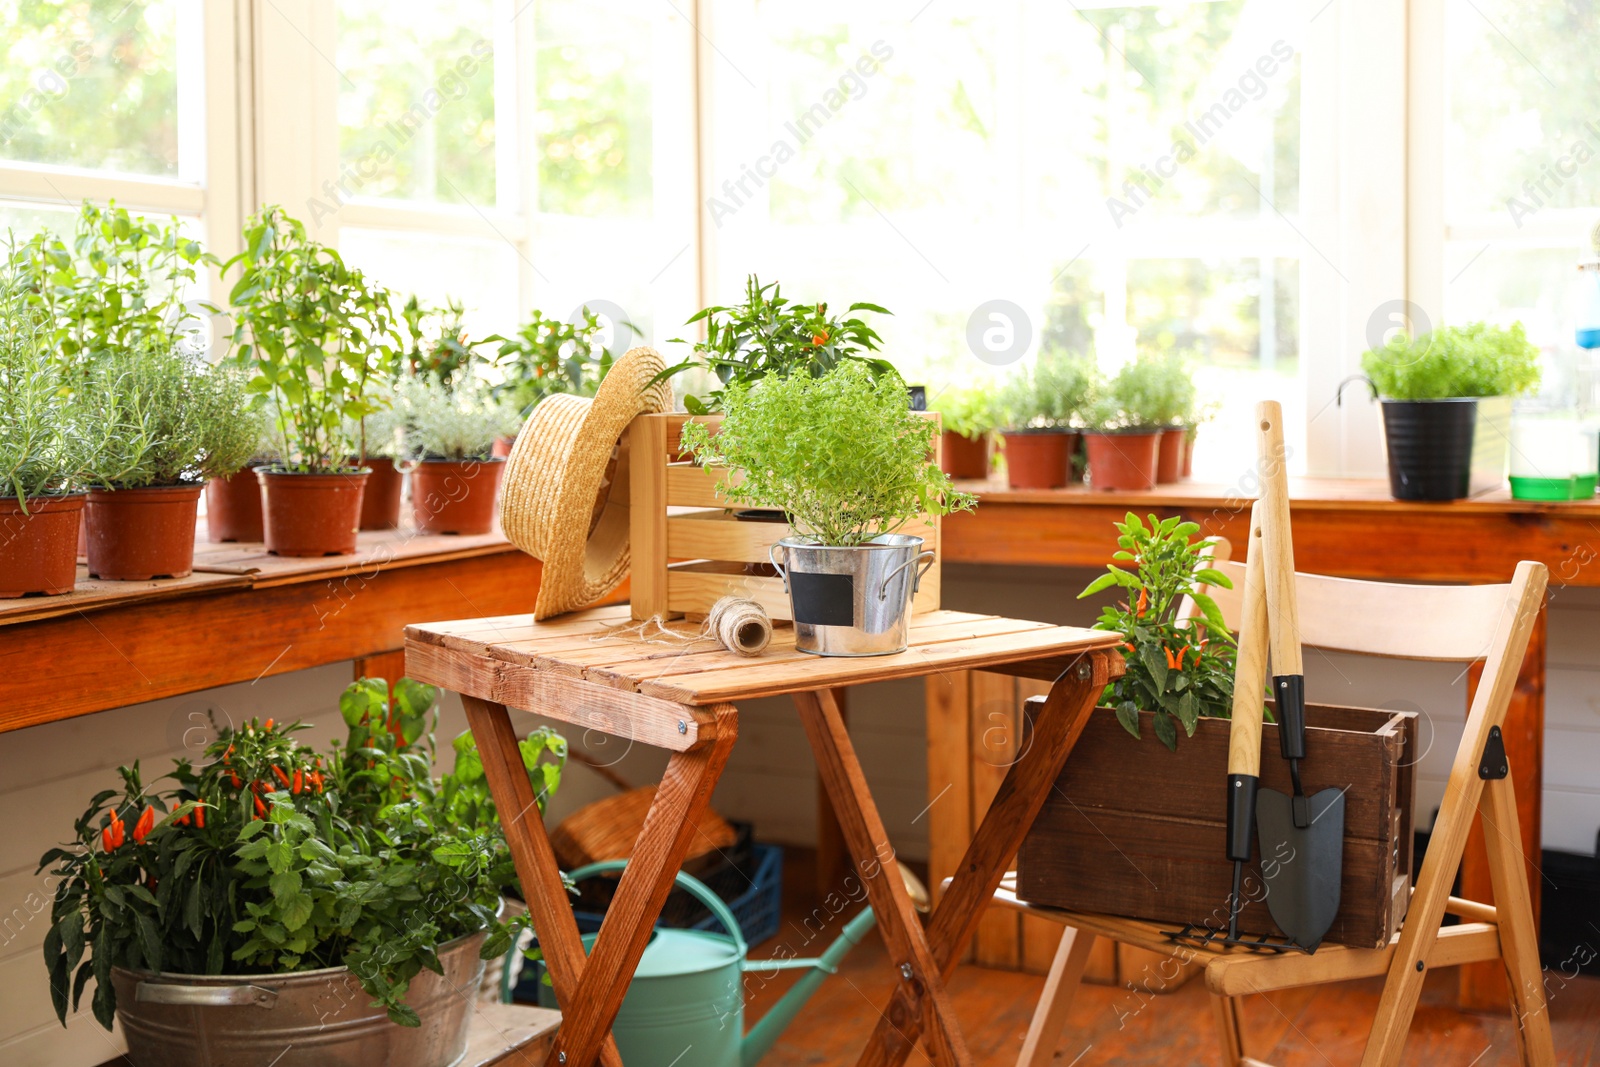 Photo of Seedlings with gardening tools on wooden table and chair in shop